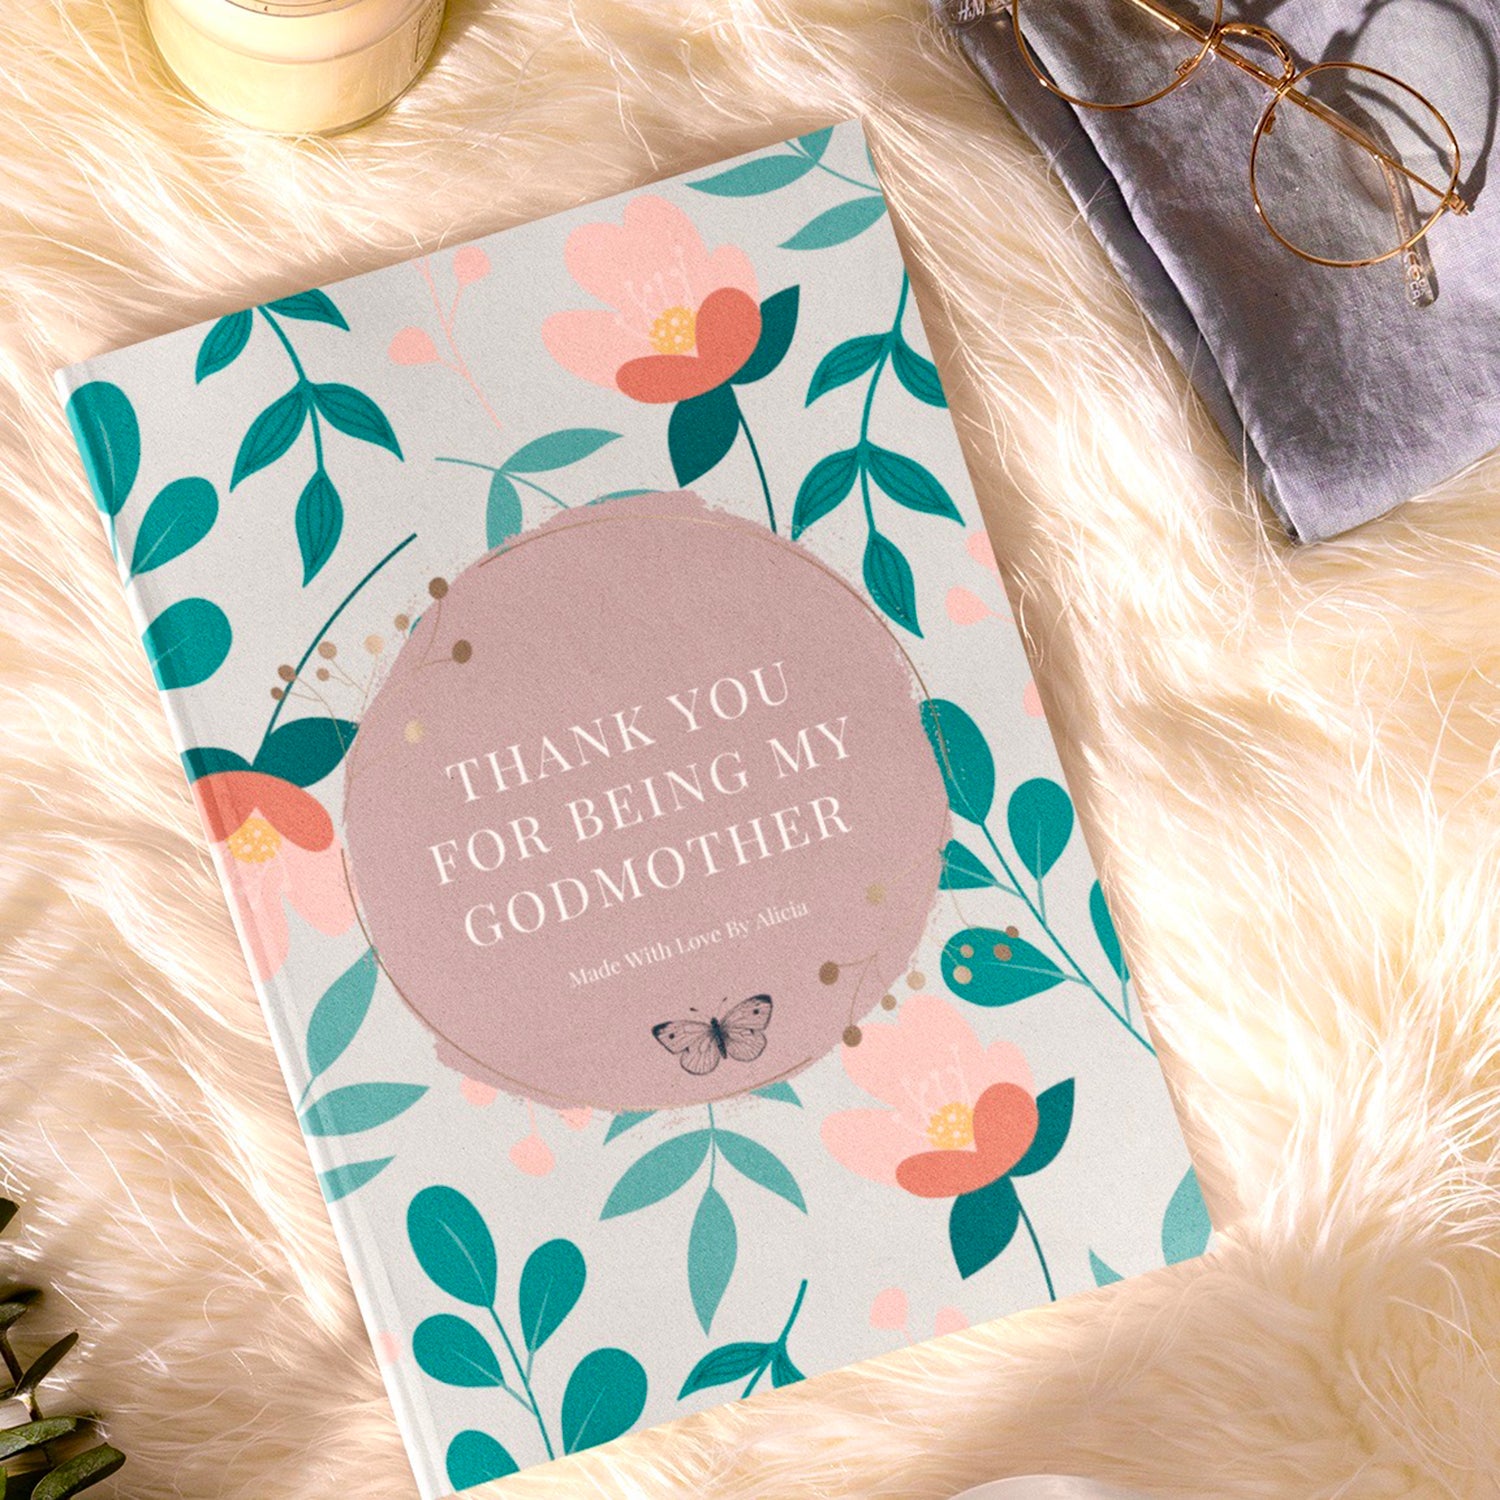 Personalized Gift For Godmother, Personalized Book For Godmother, Thank you God Mother Gift Ideas - Luhvee Books